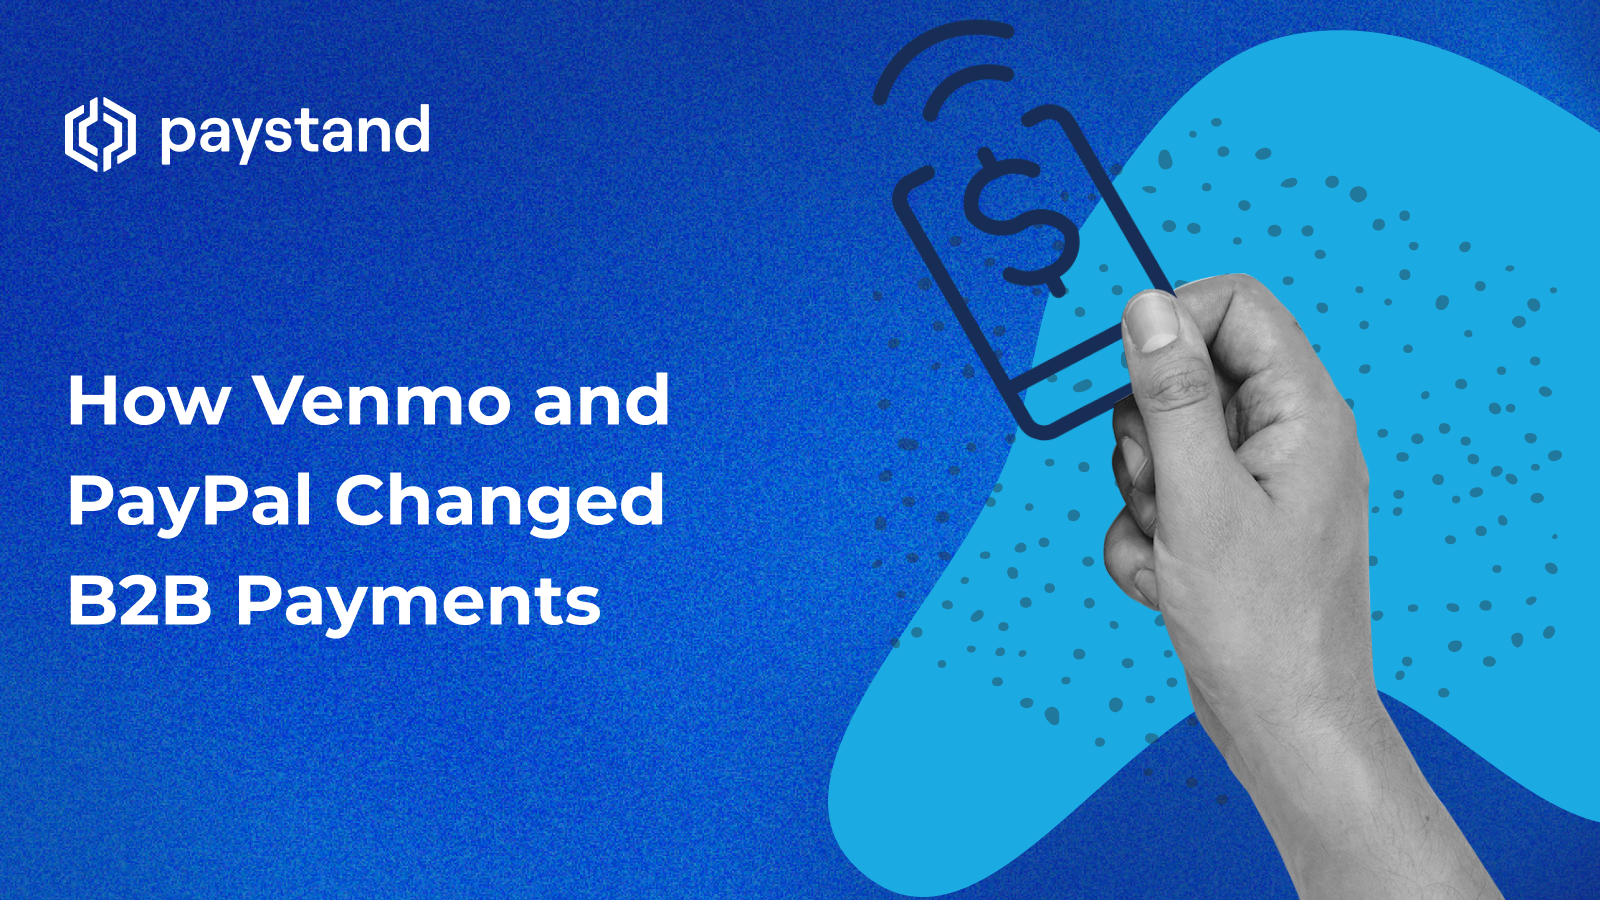 How Venmo and PayPal Changed B2B Payments